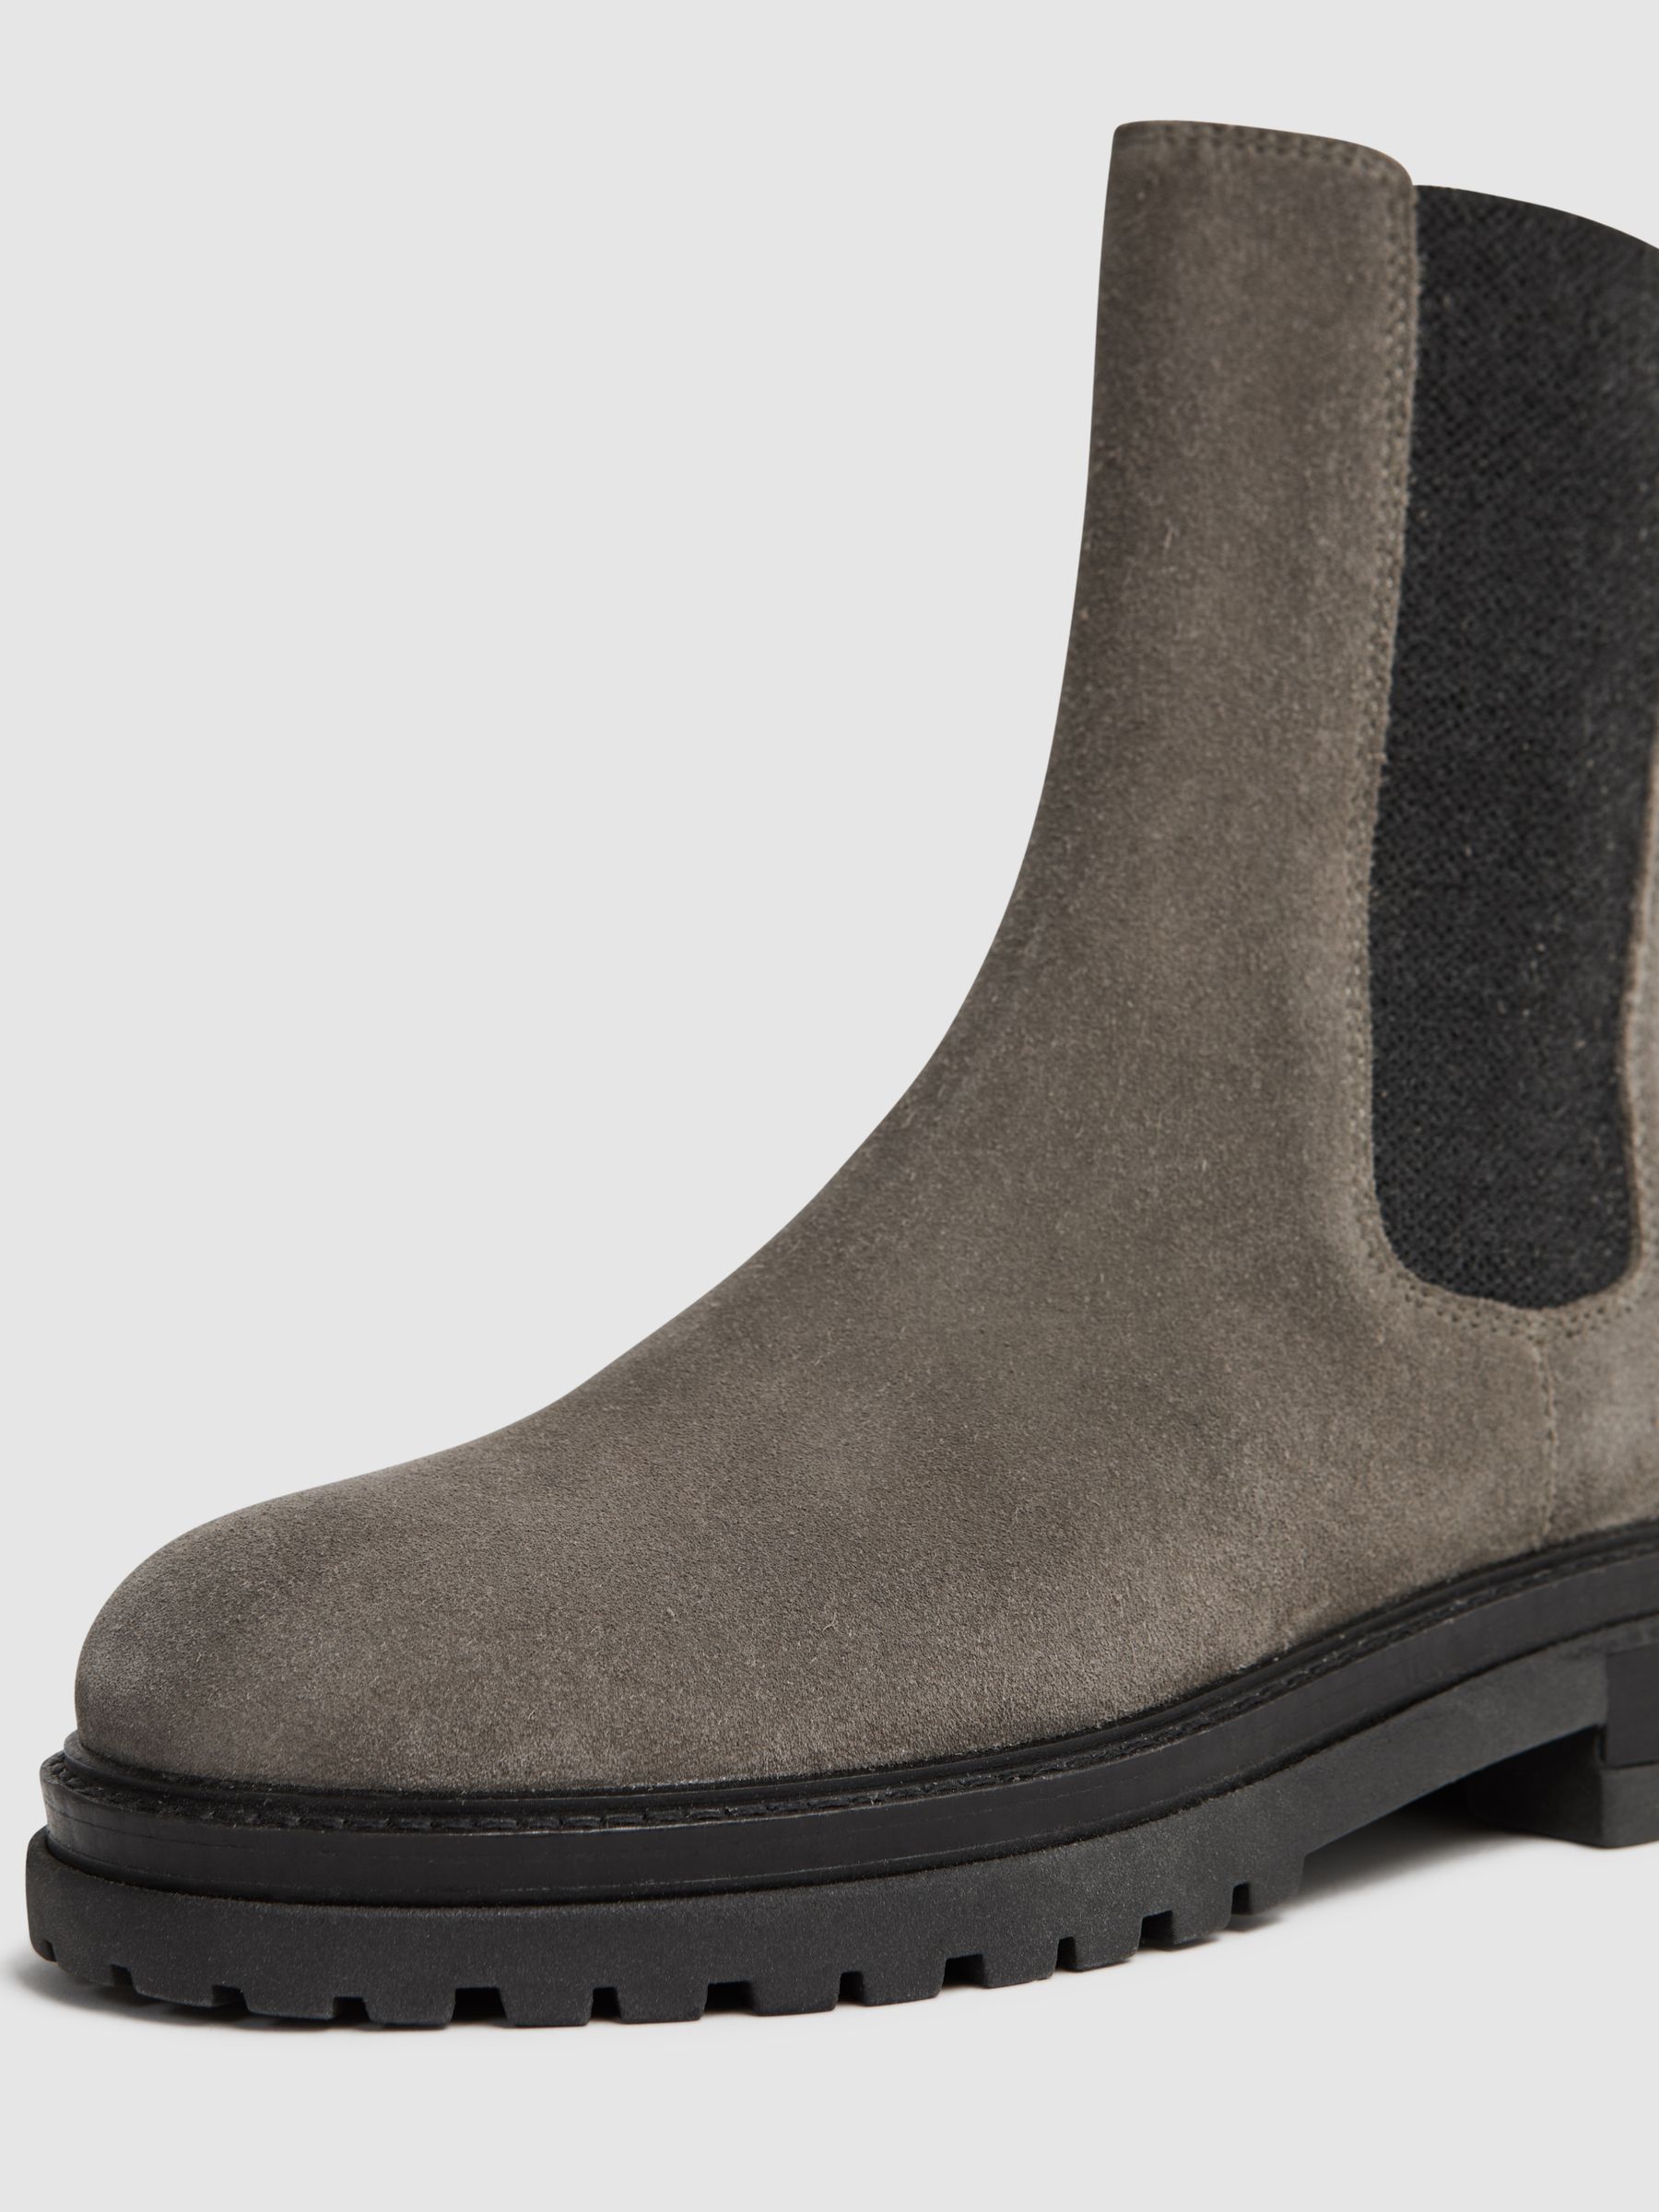 Reiss Thea Suede Chelsea Boots - REISS